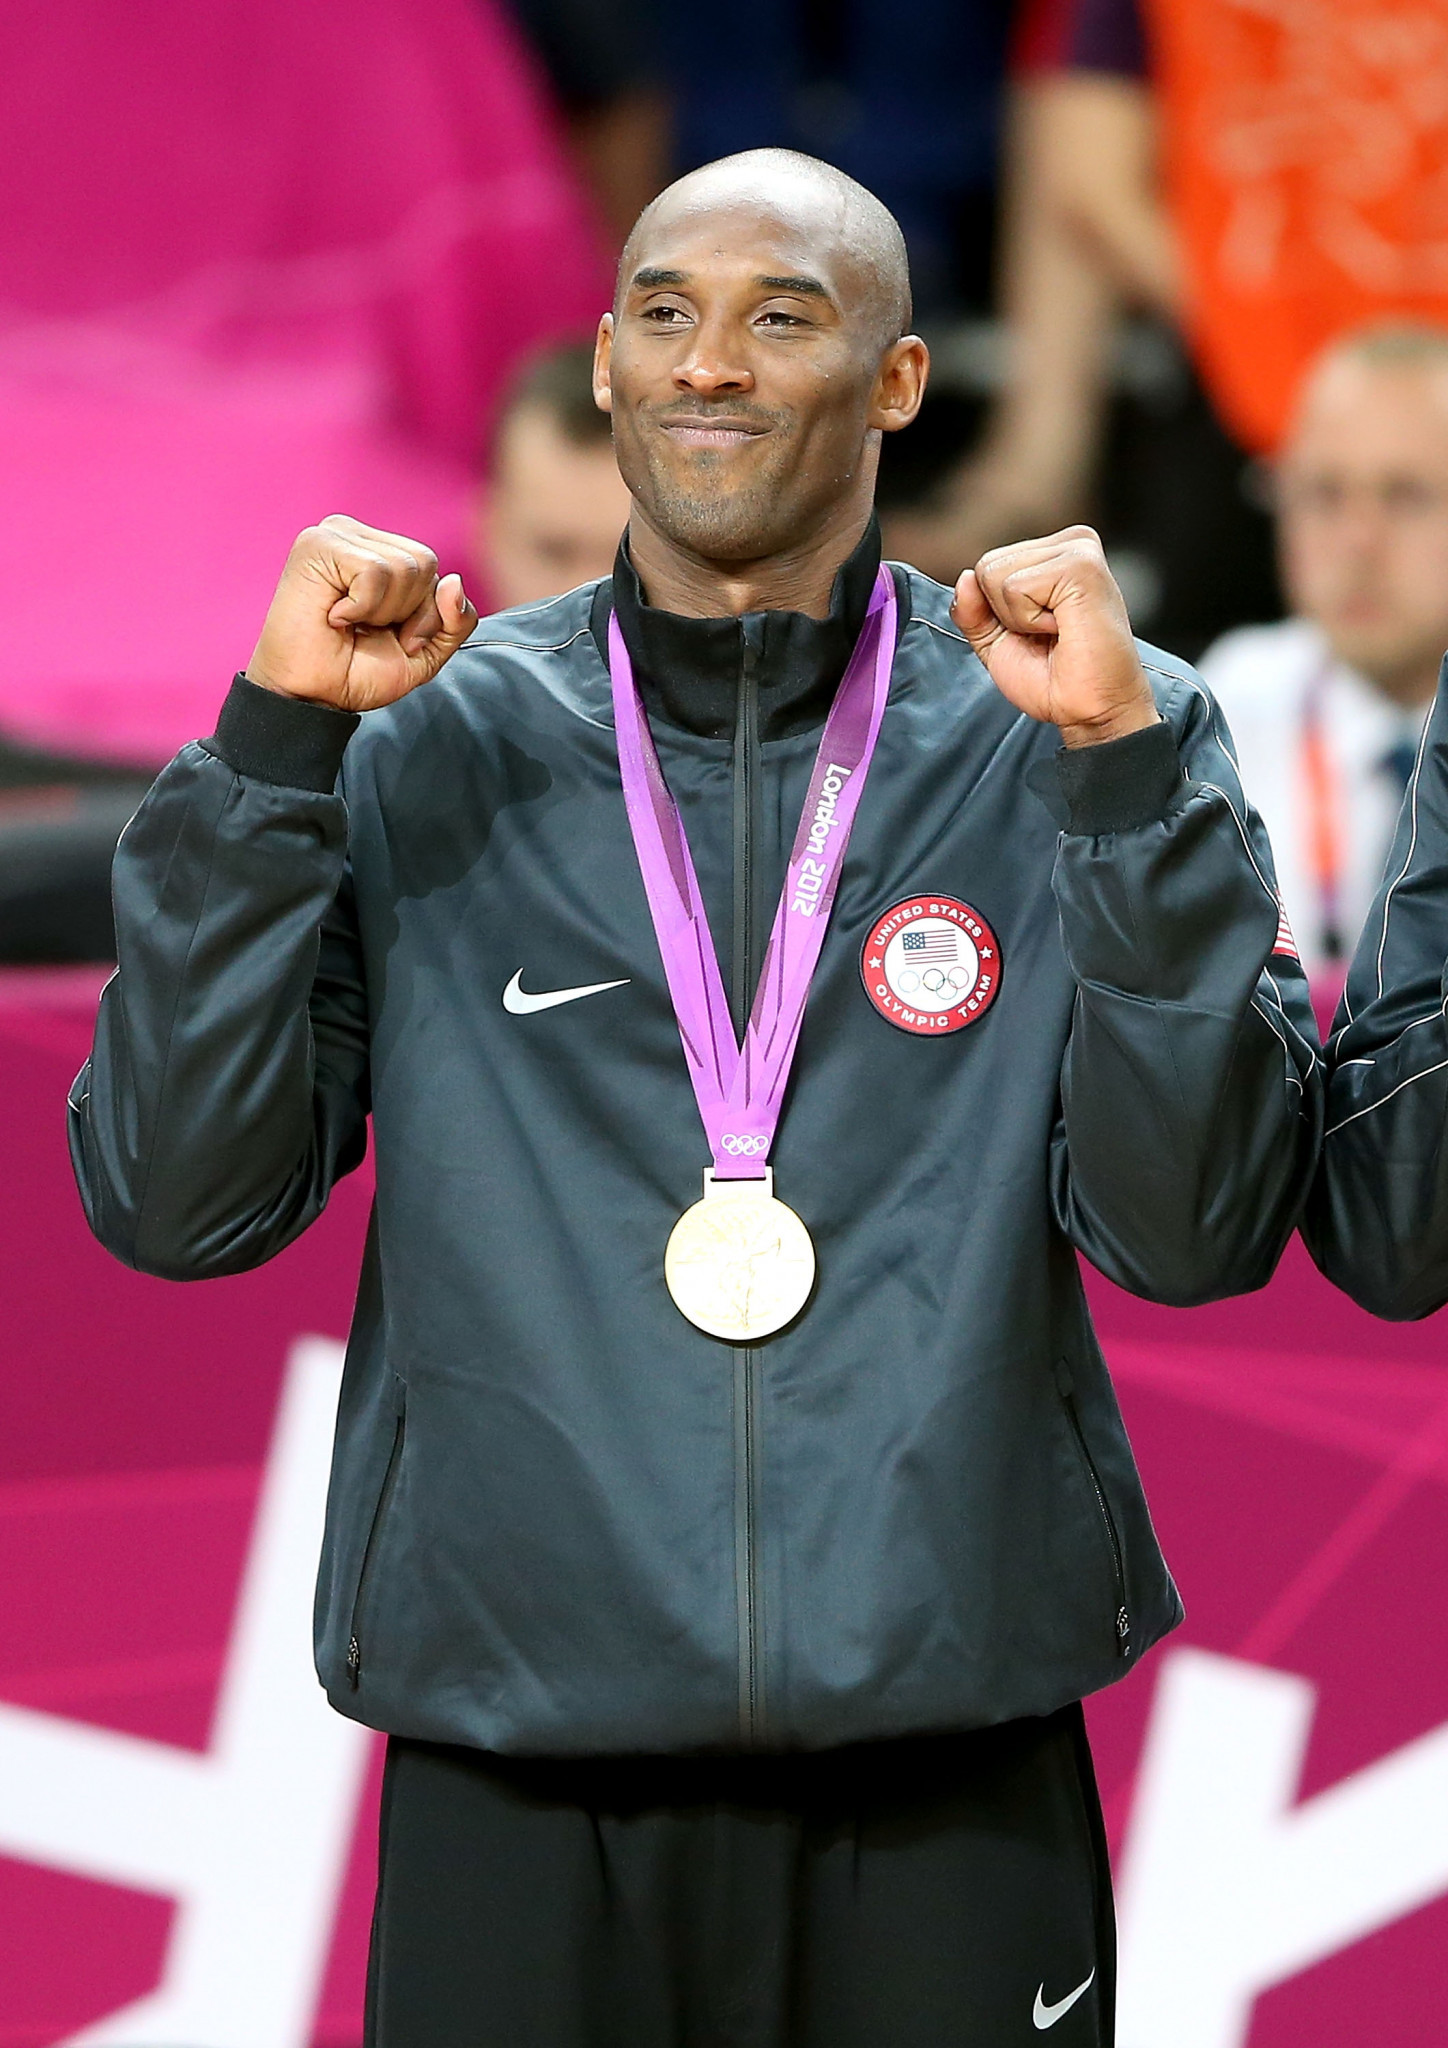 Kobe Bryant was a double Olympic champion, winning gold at Beijing 2008 and London 2012 ©Getty Images